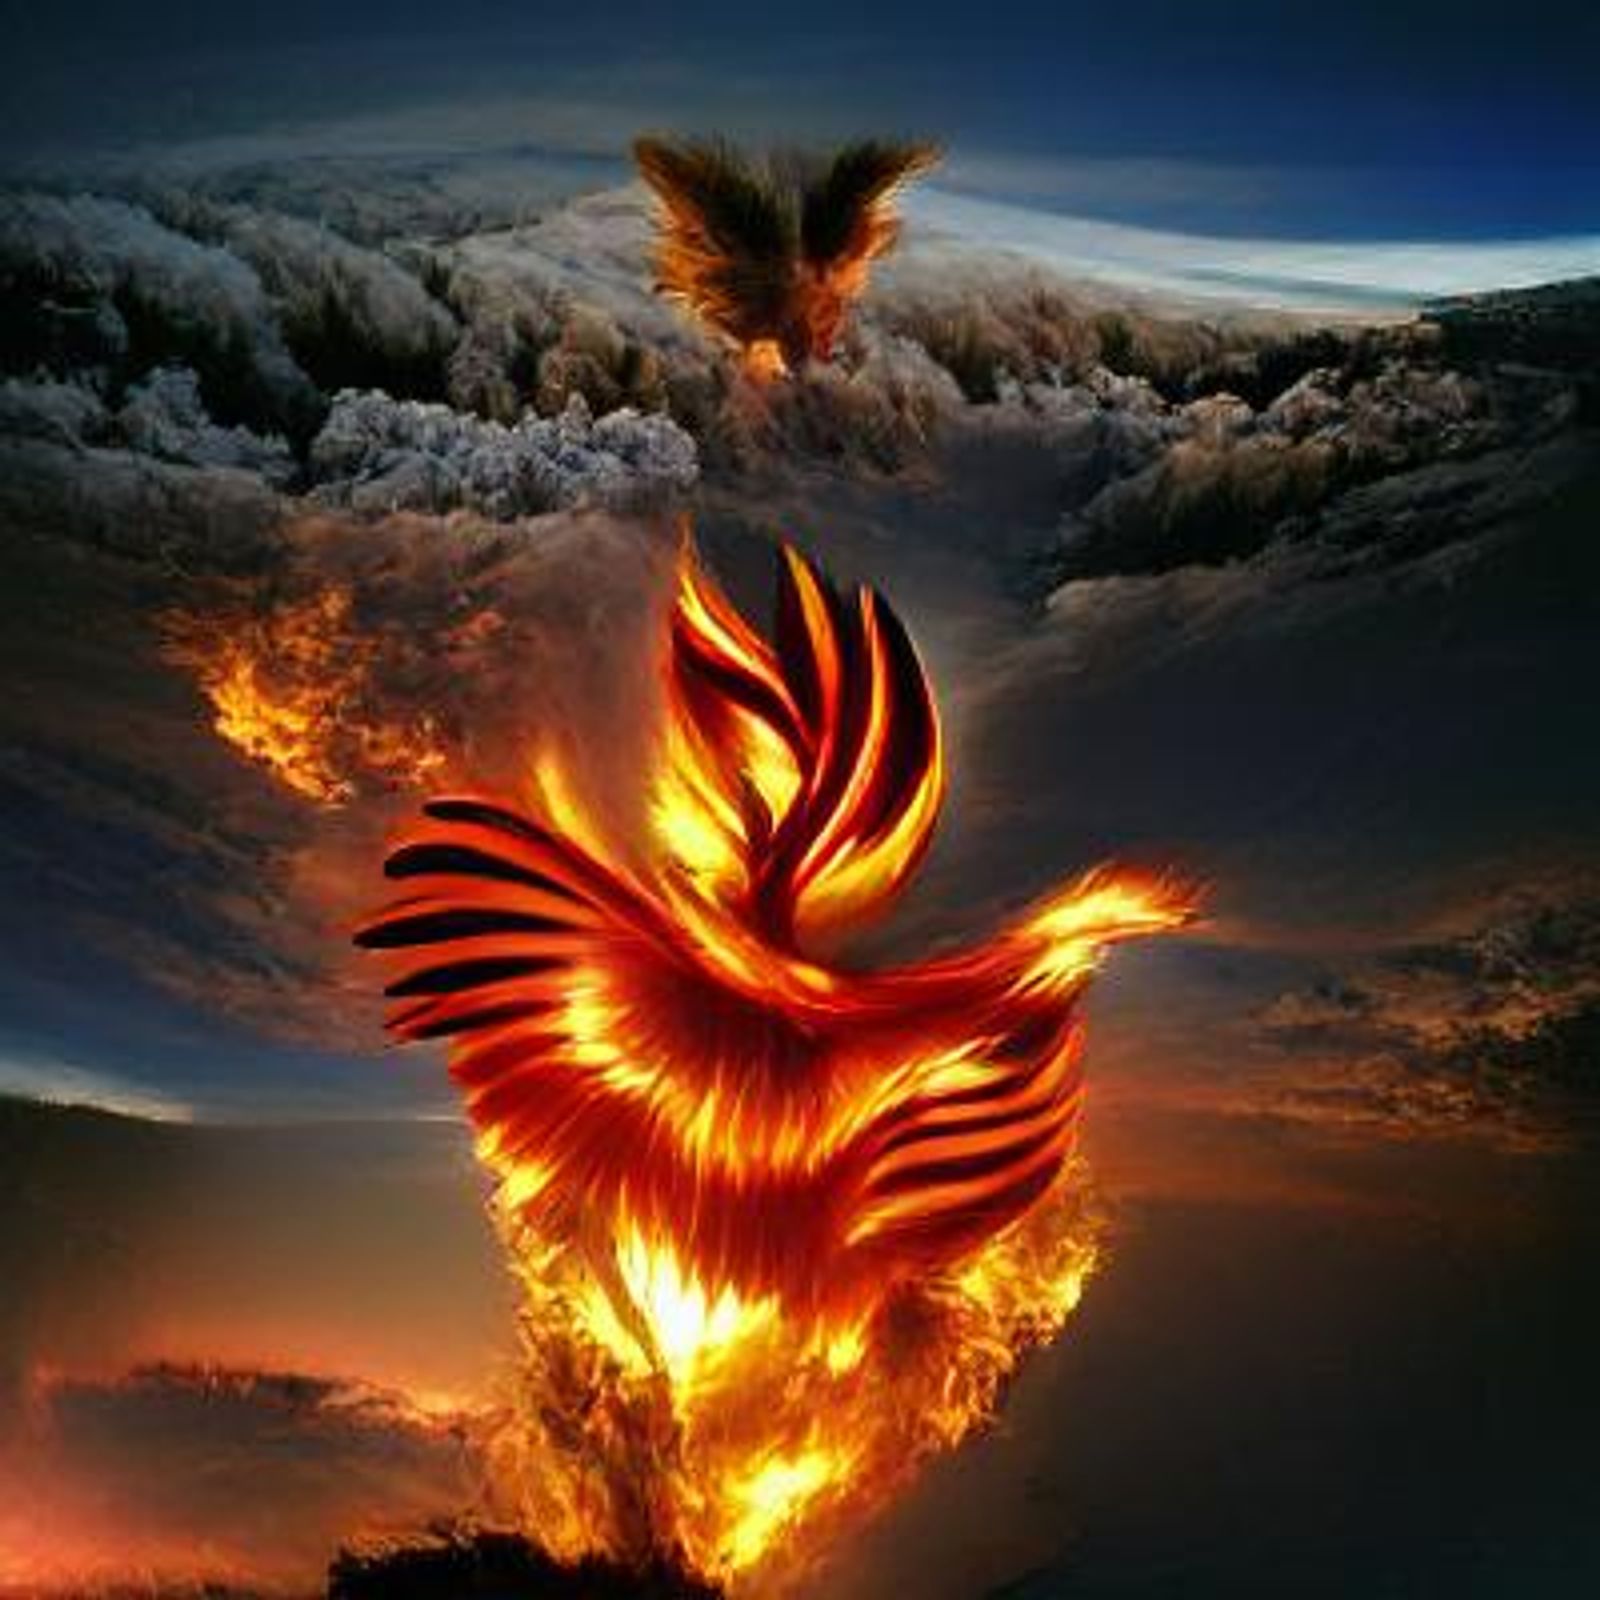 phoenix rising from the ashes painting